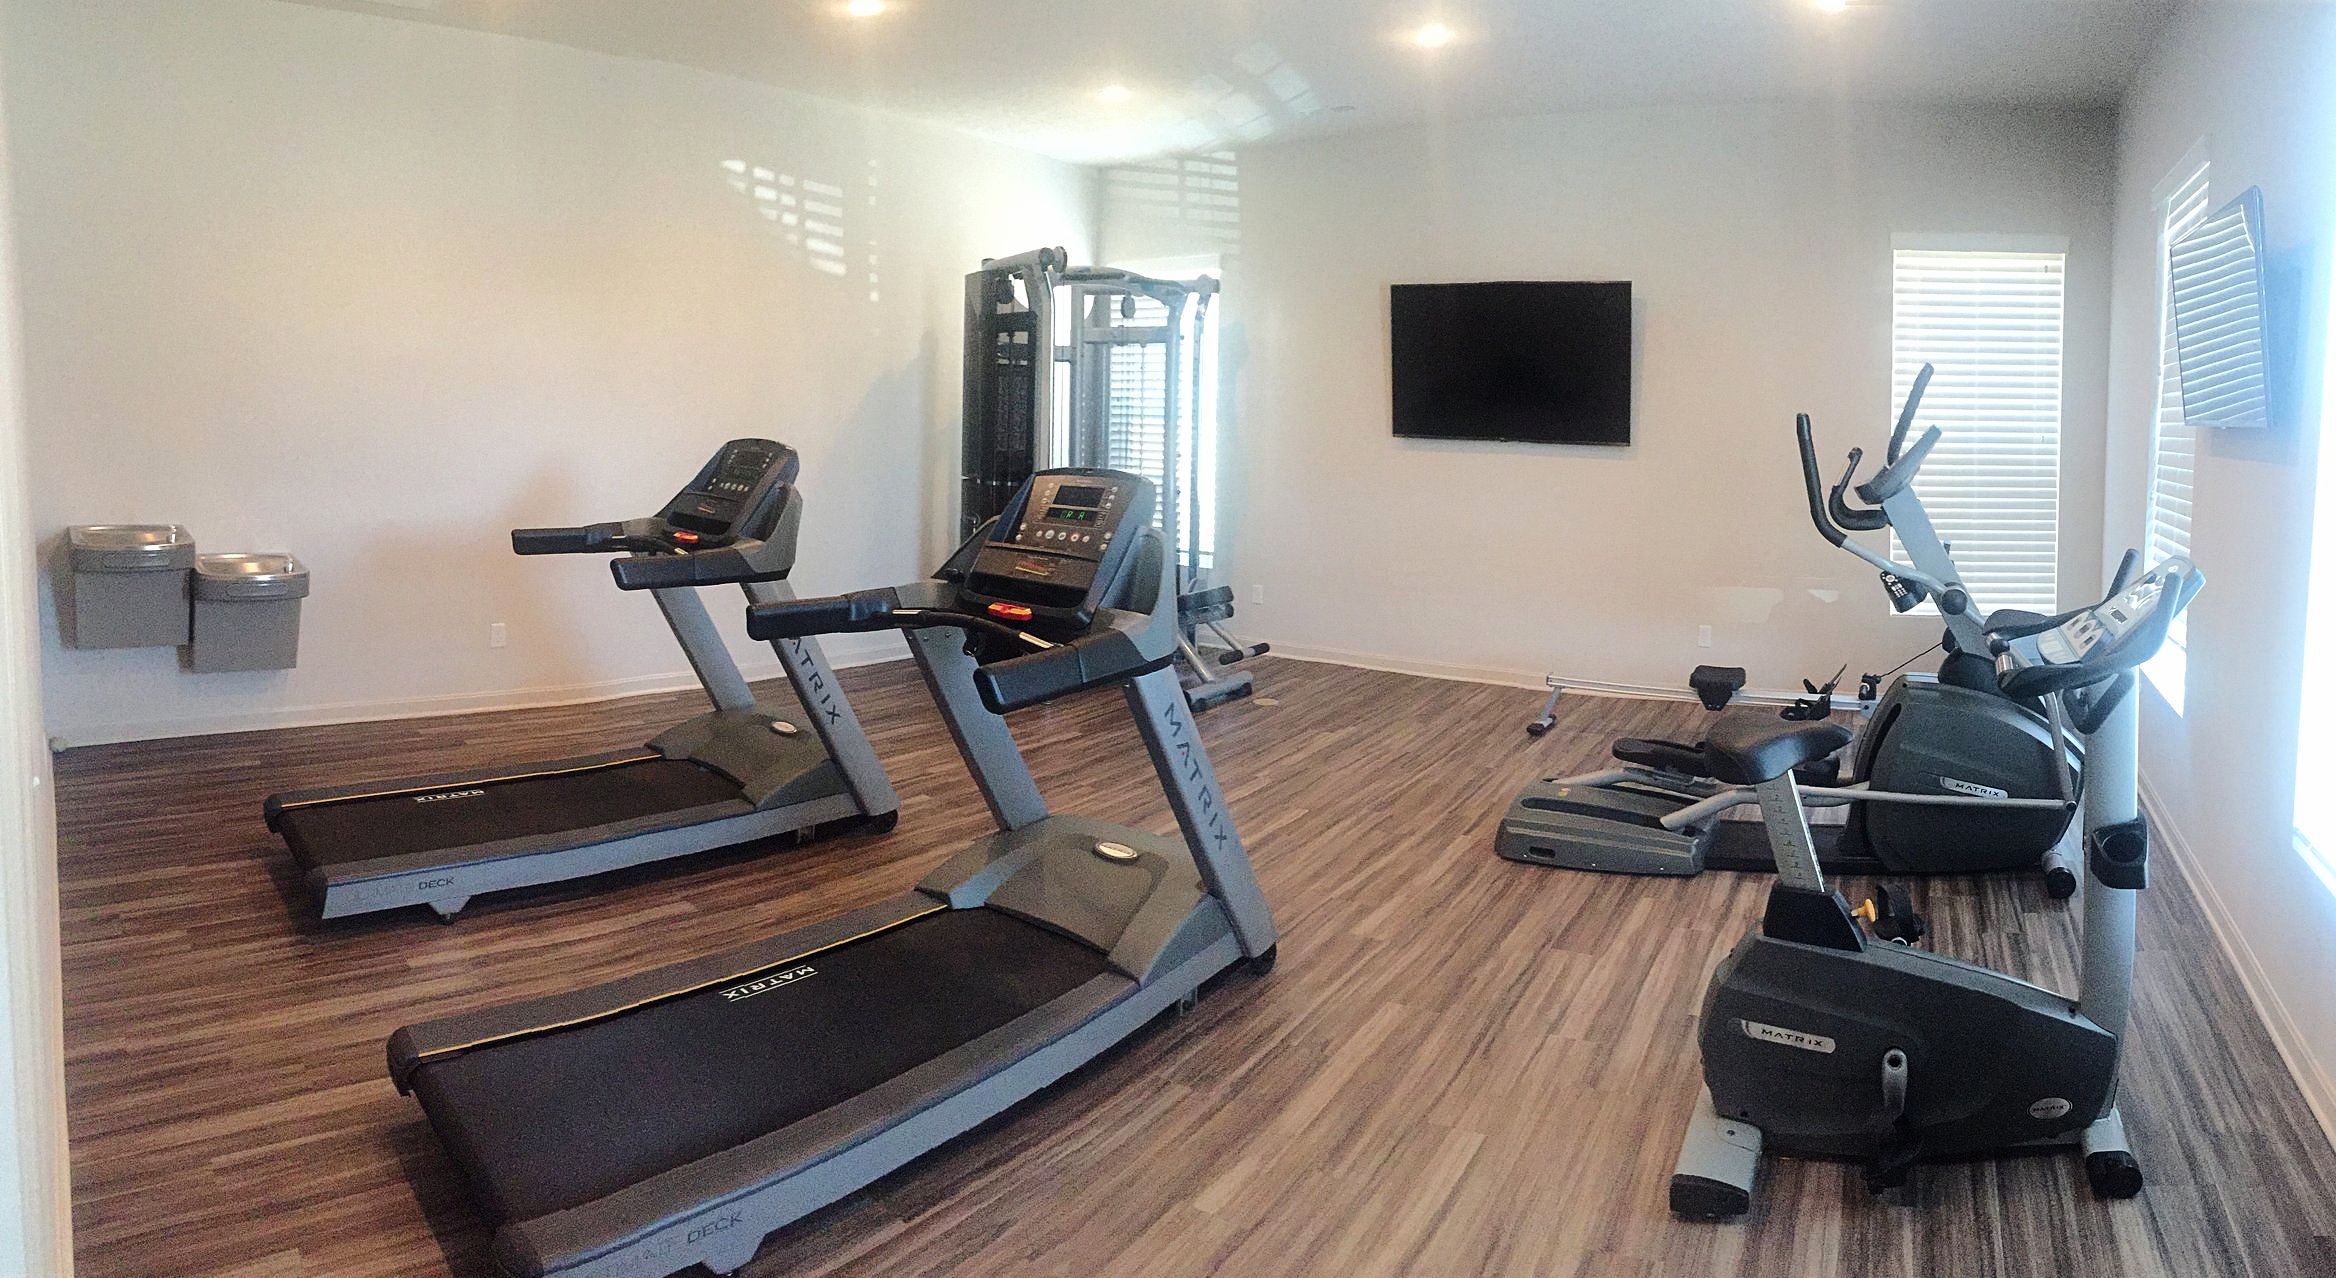 Fitness Center in the clubhouse